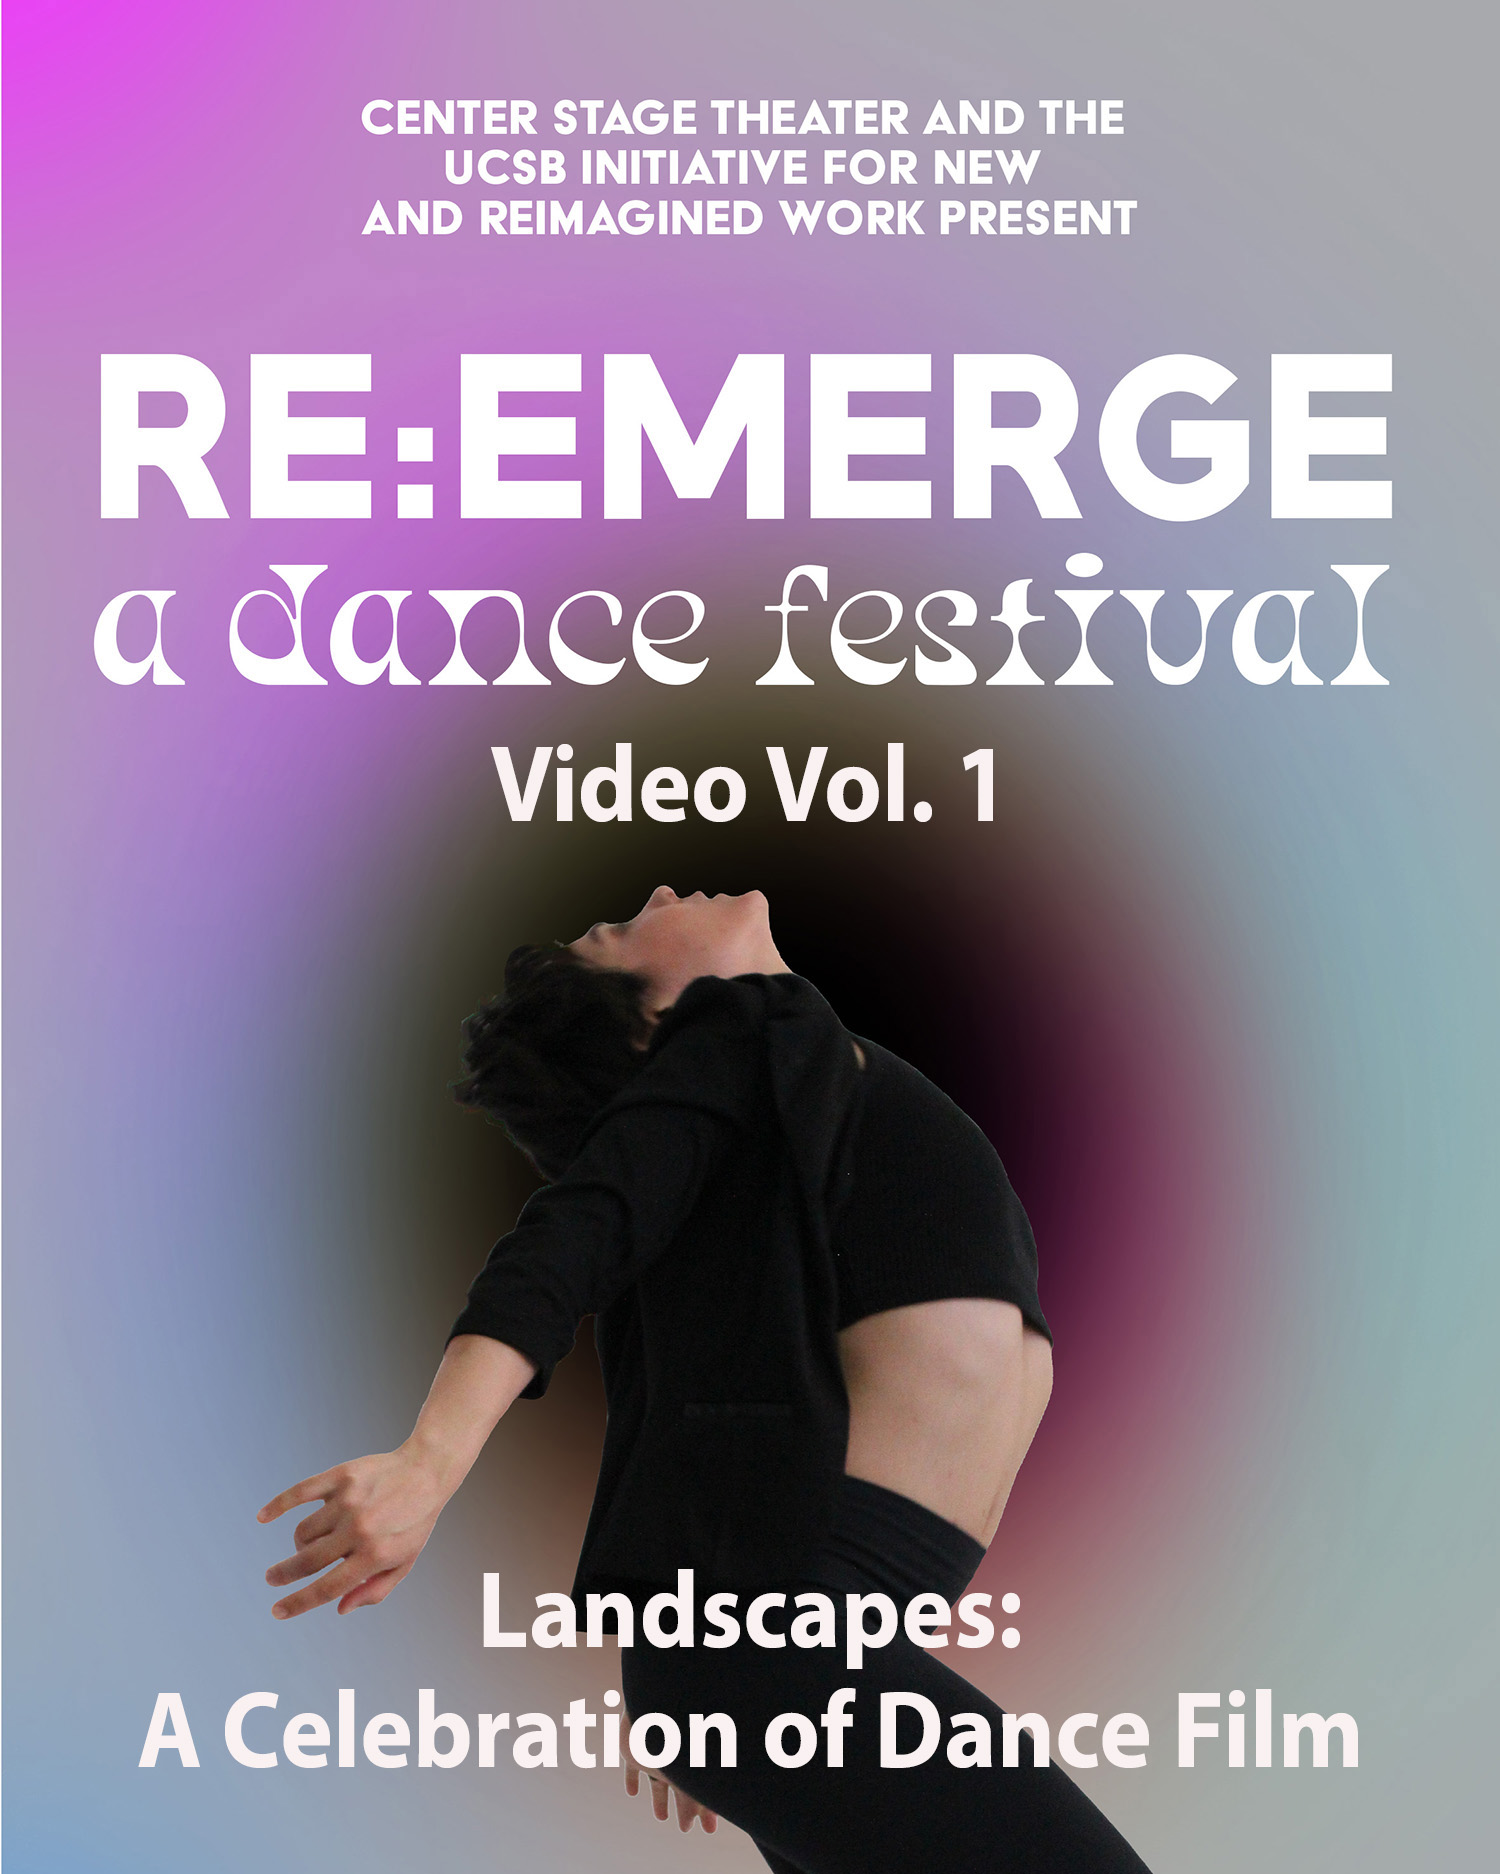 Re:Emerge Festival Video Vol. 3 - Gaucho Reunion: featuring performances by current students and alumni